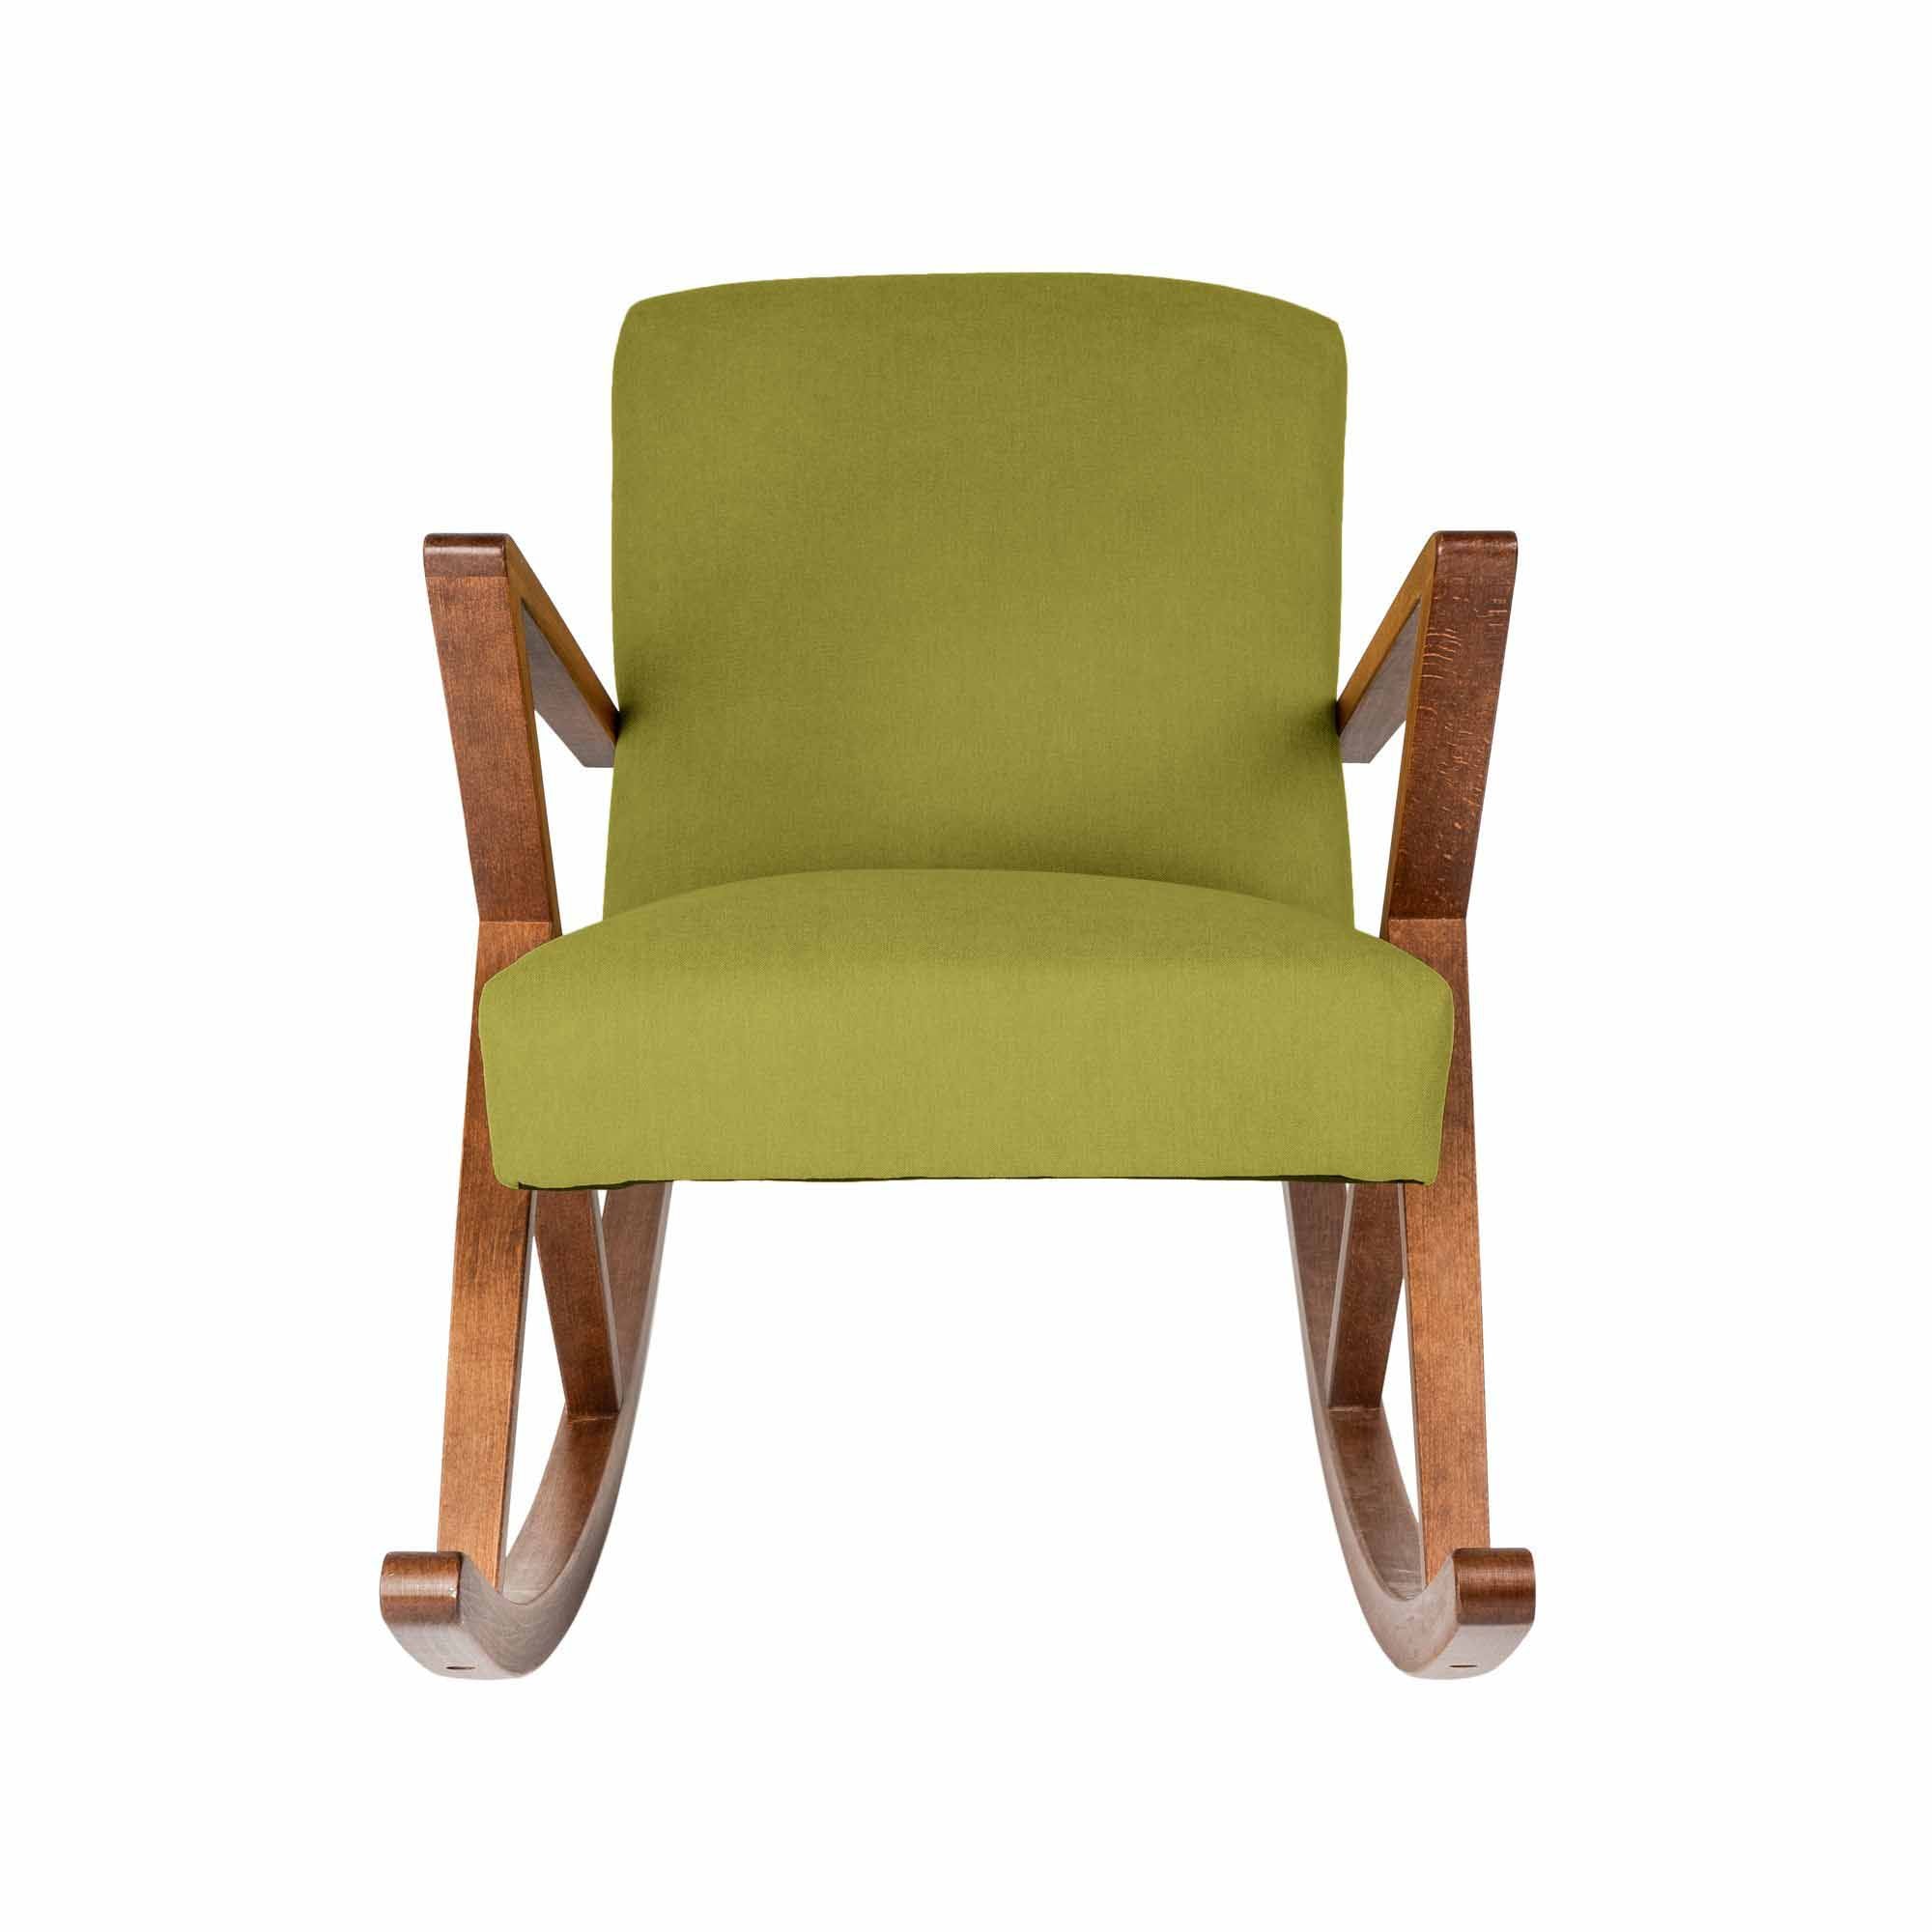  Rocking Chair, Beech Wood Frame, Walnut Colour green fabric, front view